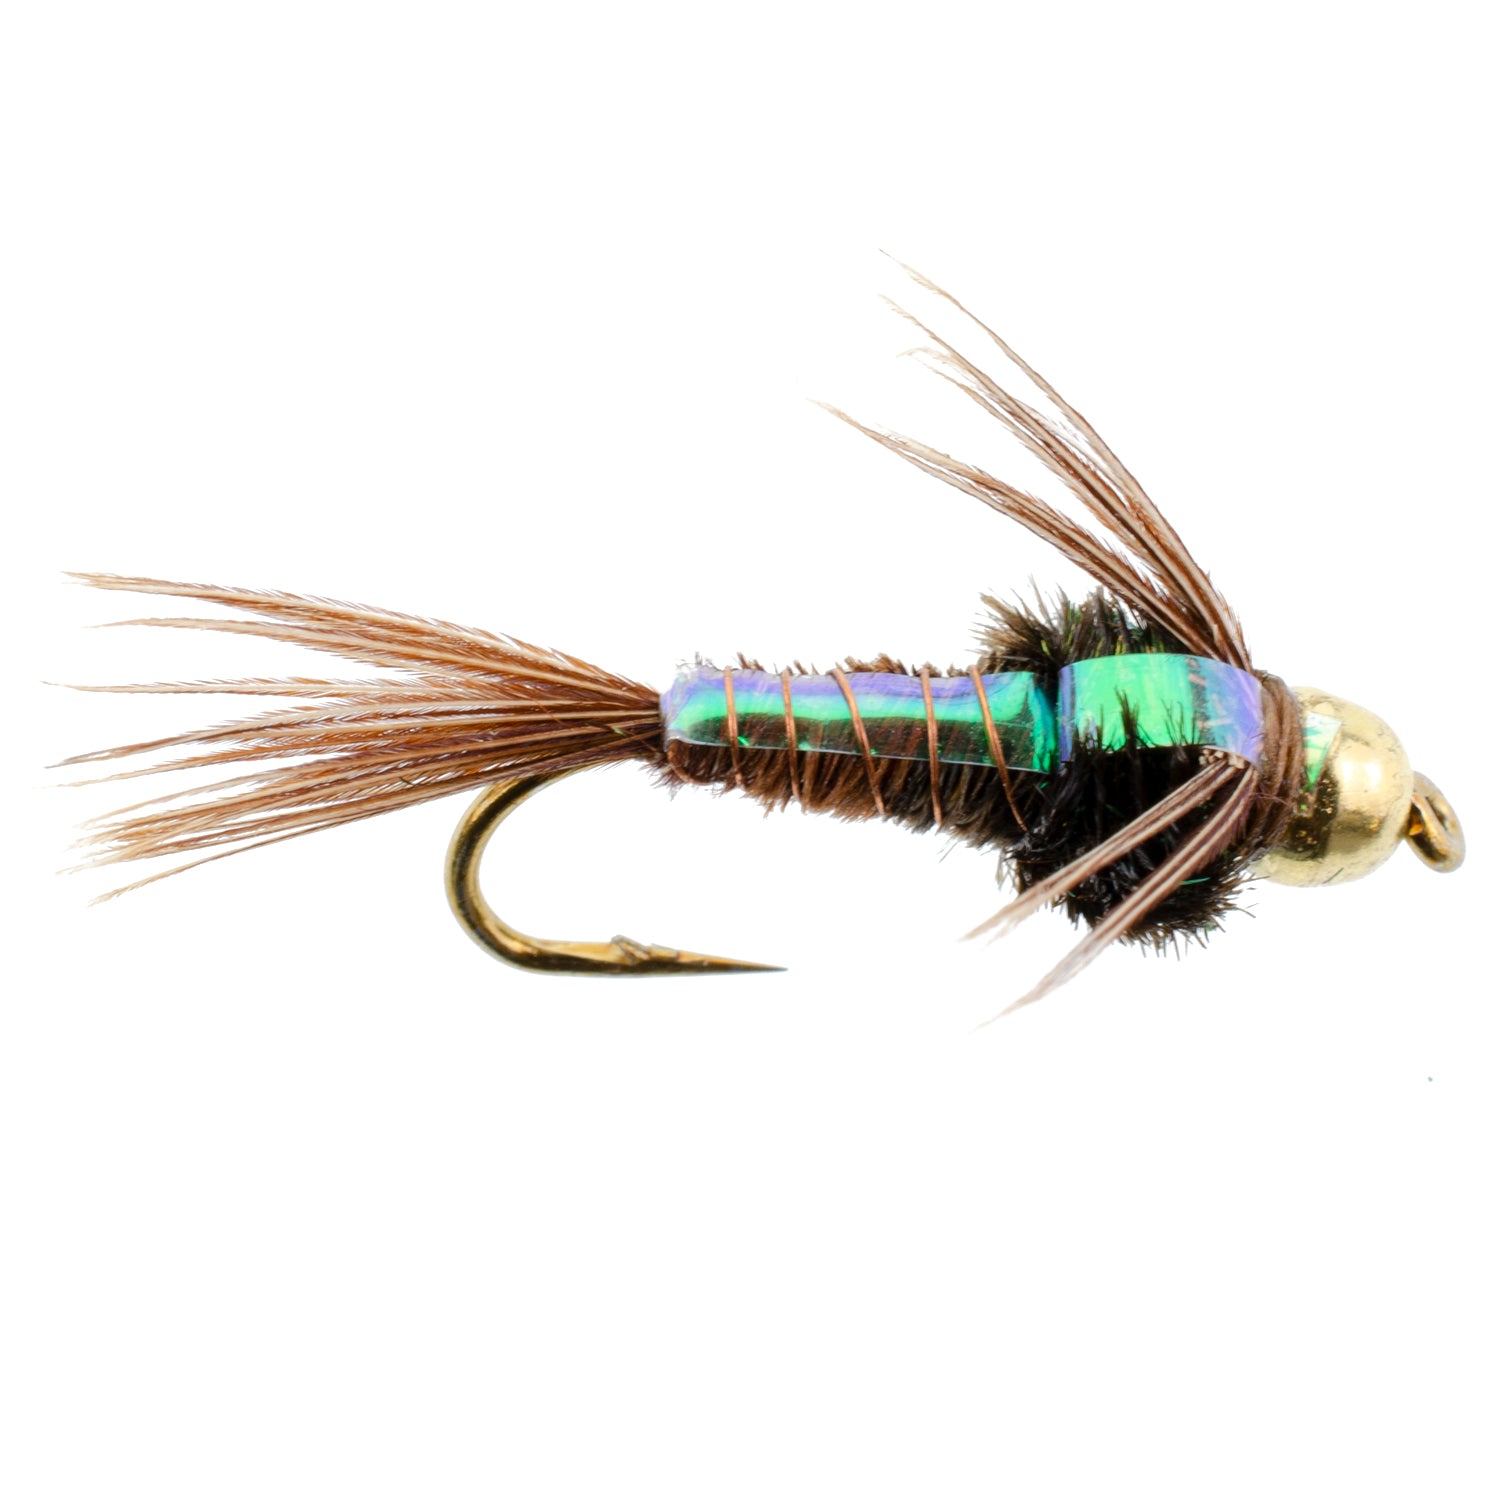 3 Pack Bead Head Flashback Pheasant Tail Nymph Fly Fishing Flies Hook Size 14